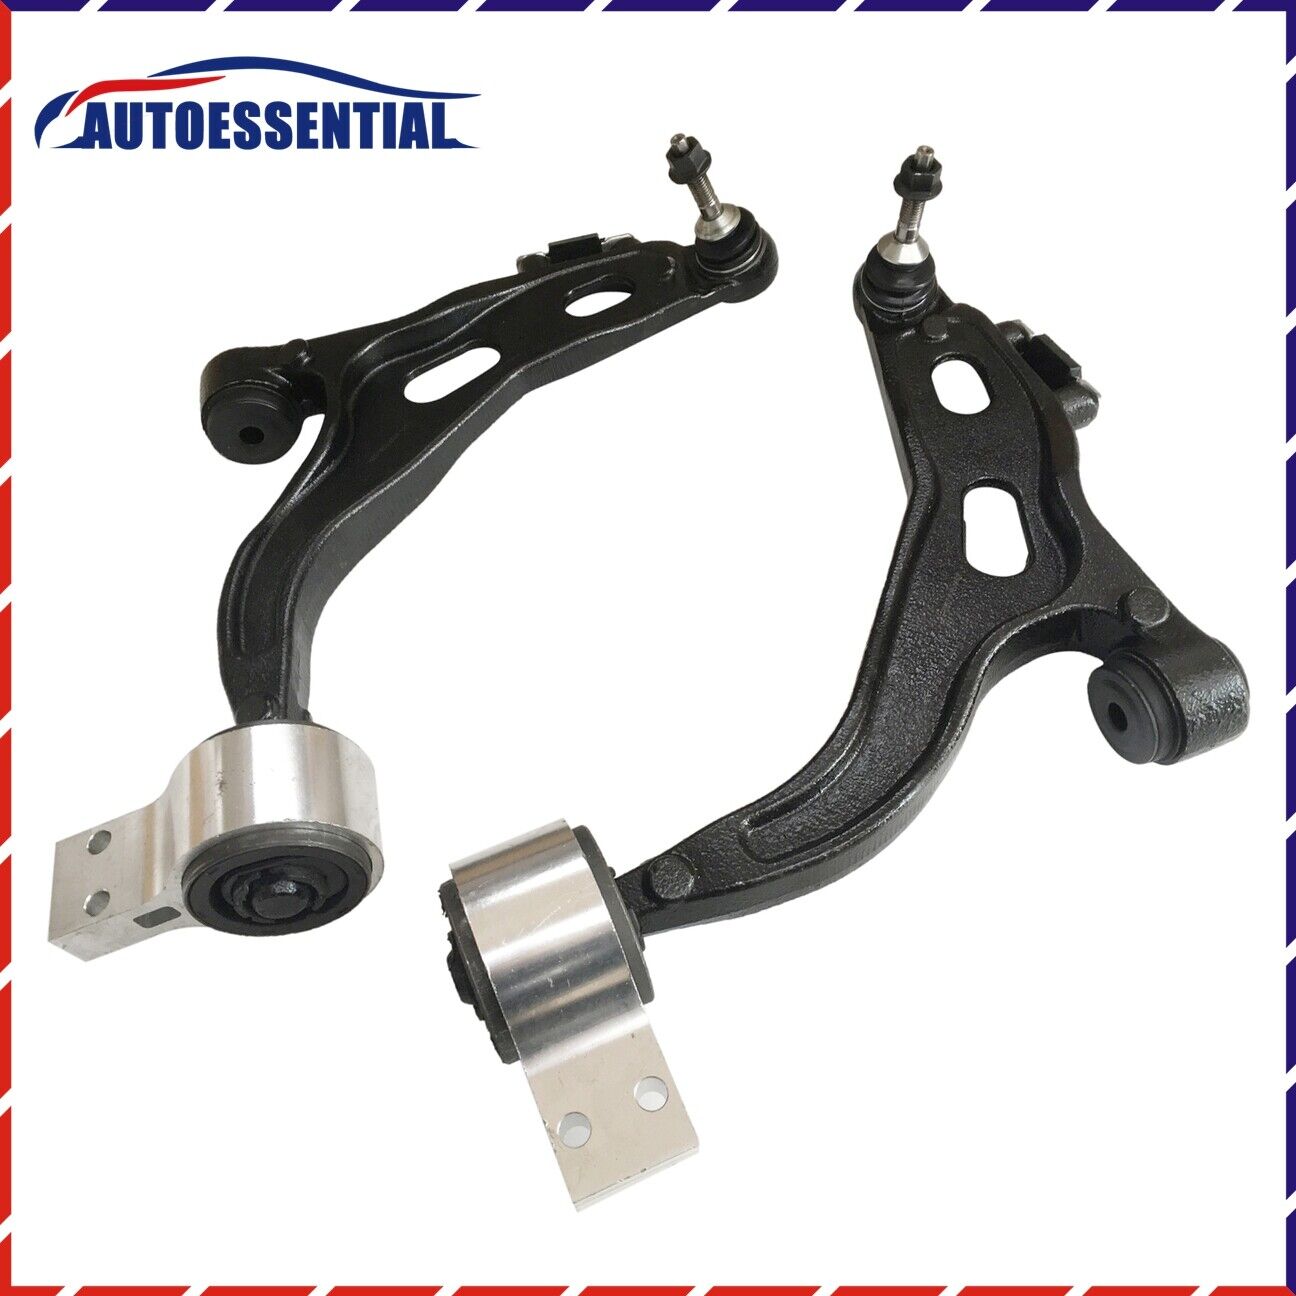 Front Lower Control Arm Set For Ford Freestyle Five Hundred Mercury 2005-2007